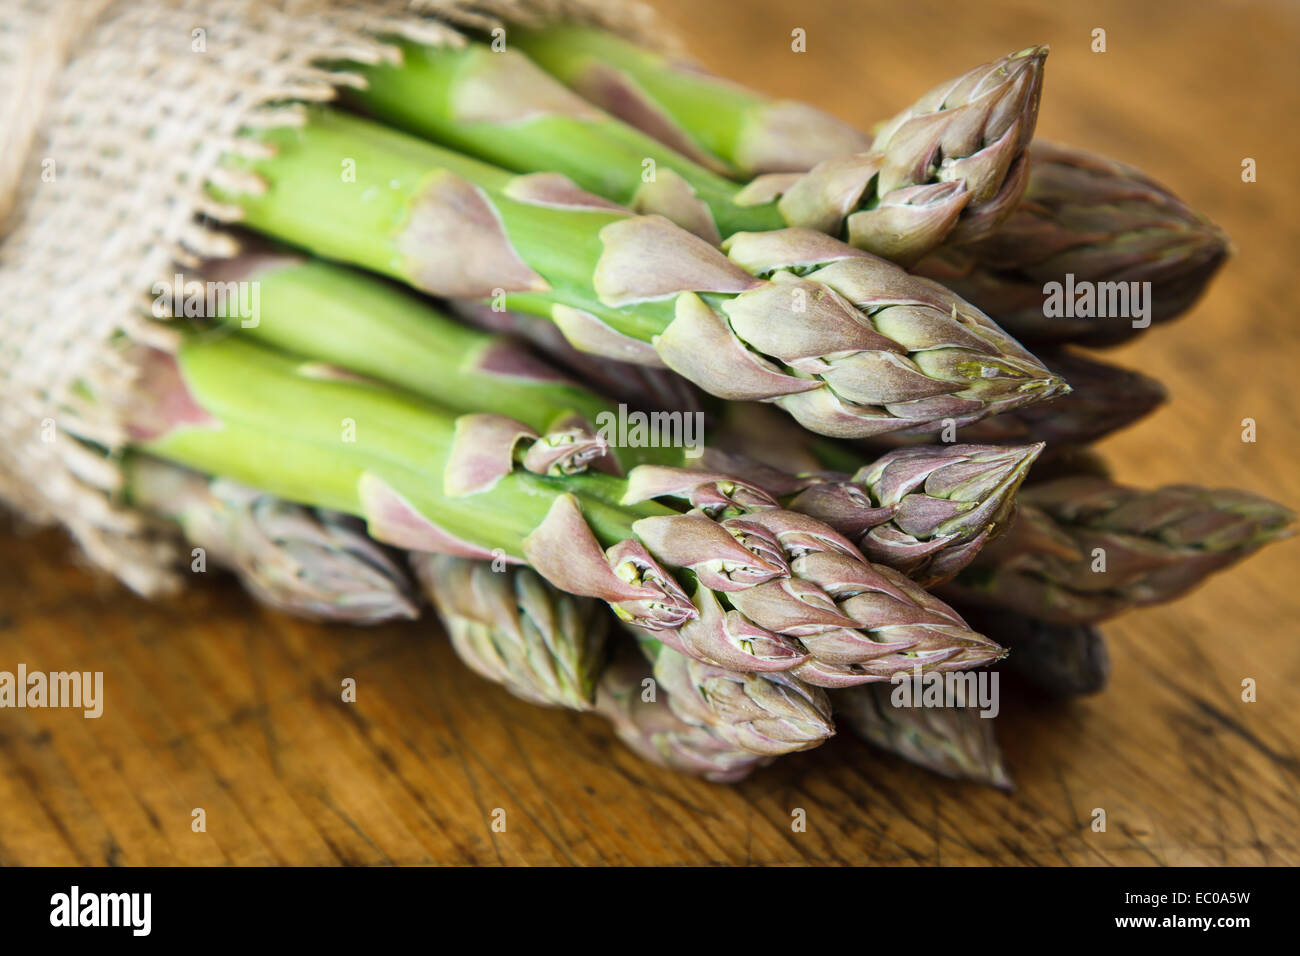 Green asparagus on wooden background Stock Photo